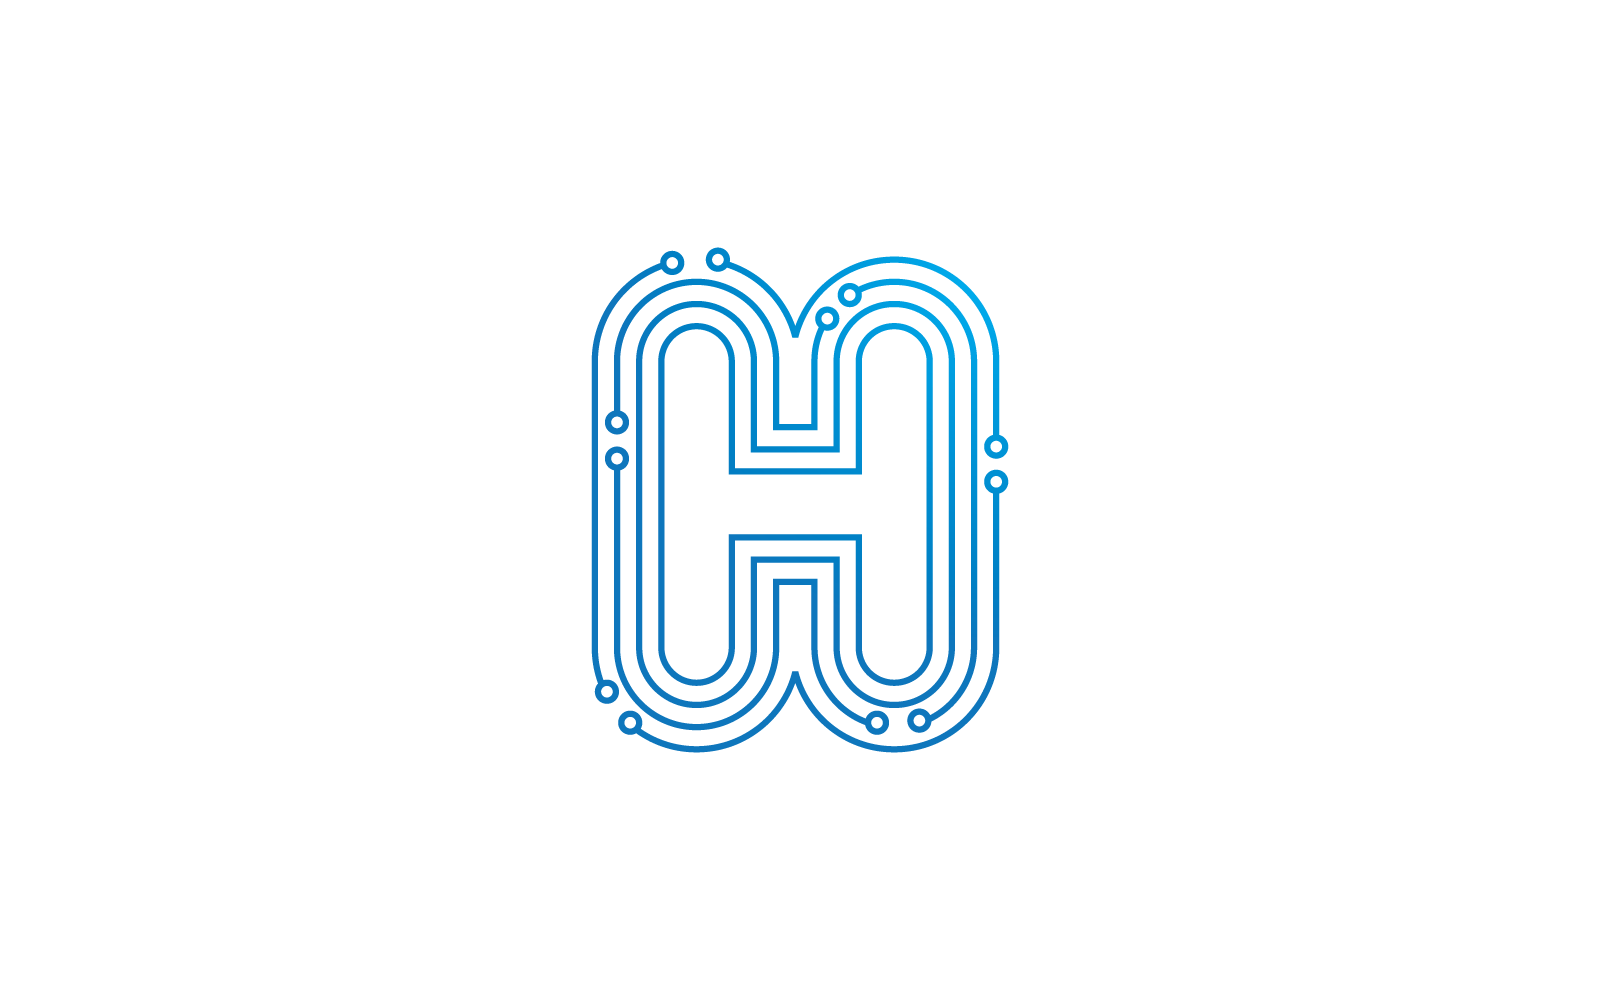 H initial letter Circuit technology illustration logo vector template